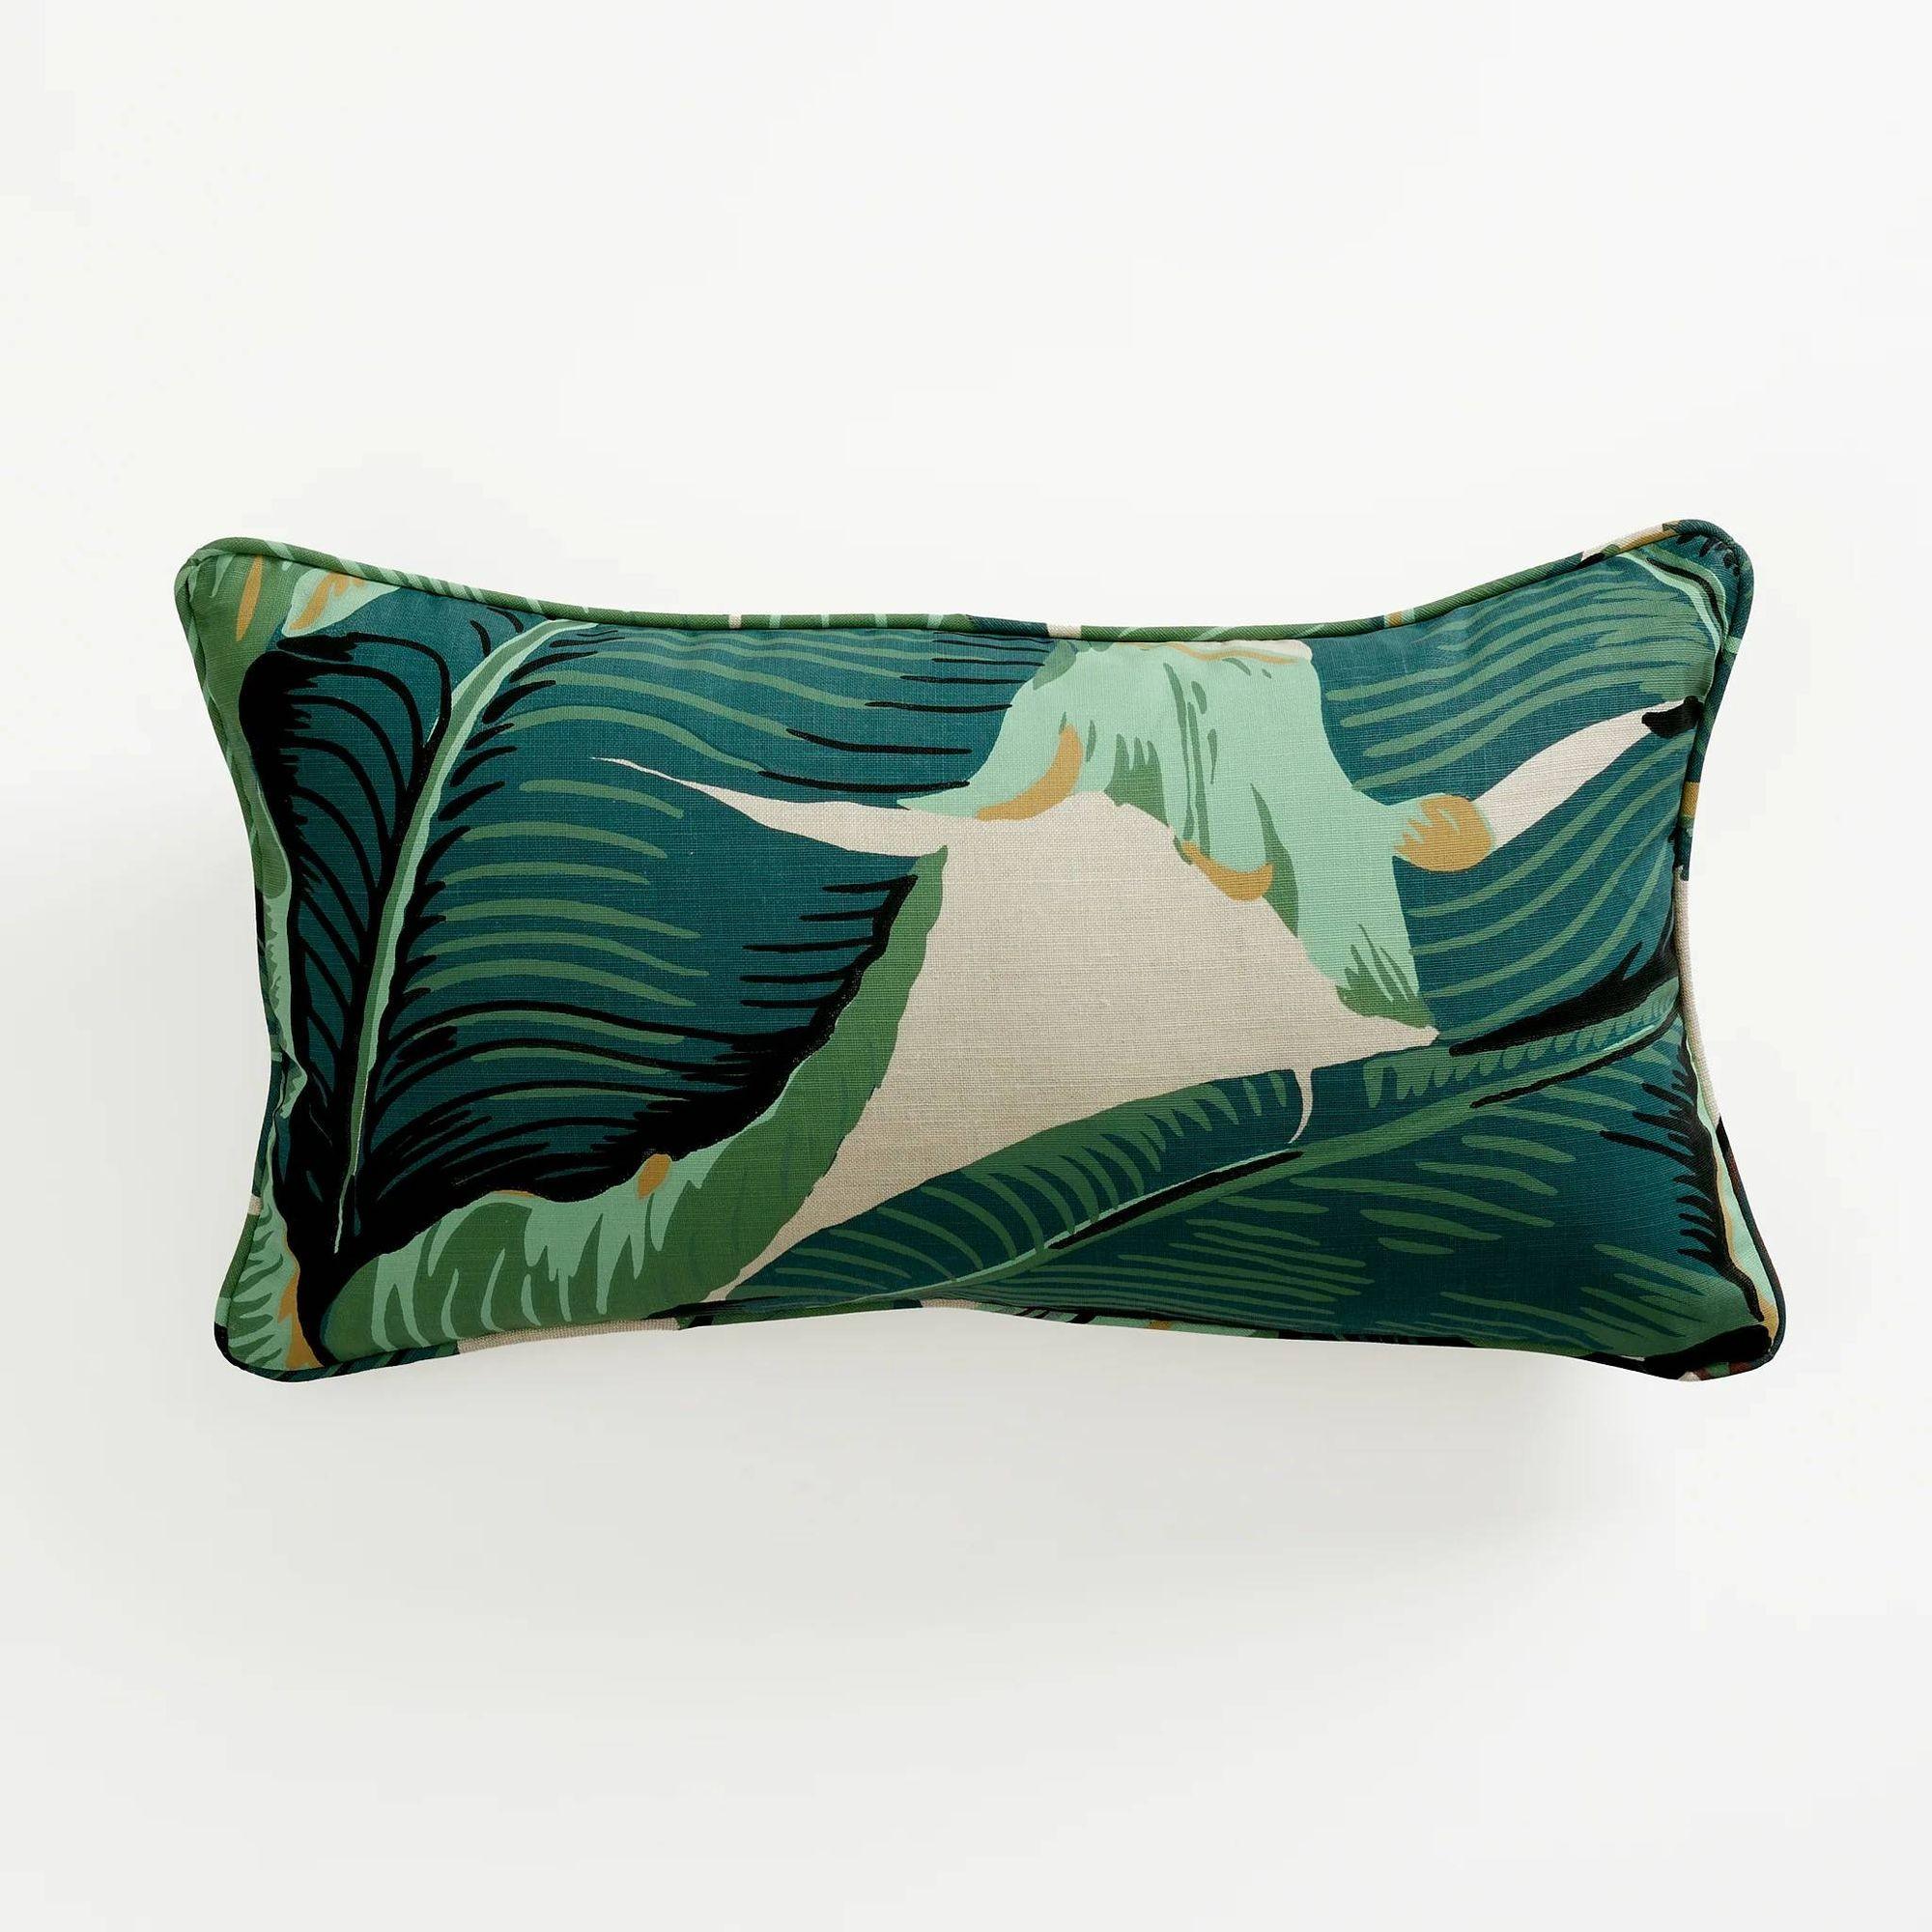 Add a touch of timeless Hollywood glamour to your home decor with this unused throw pillow, featuring the iconic Martinique Banana Leaf fabric from The Beverly Hills Hotel. Hand-screened and painted by the original manufacturer in Los Angeles, this